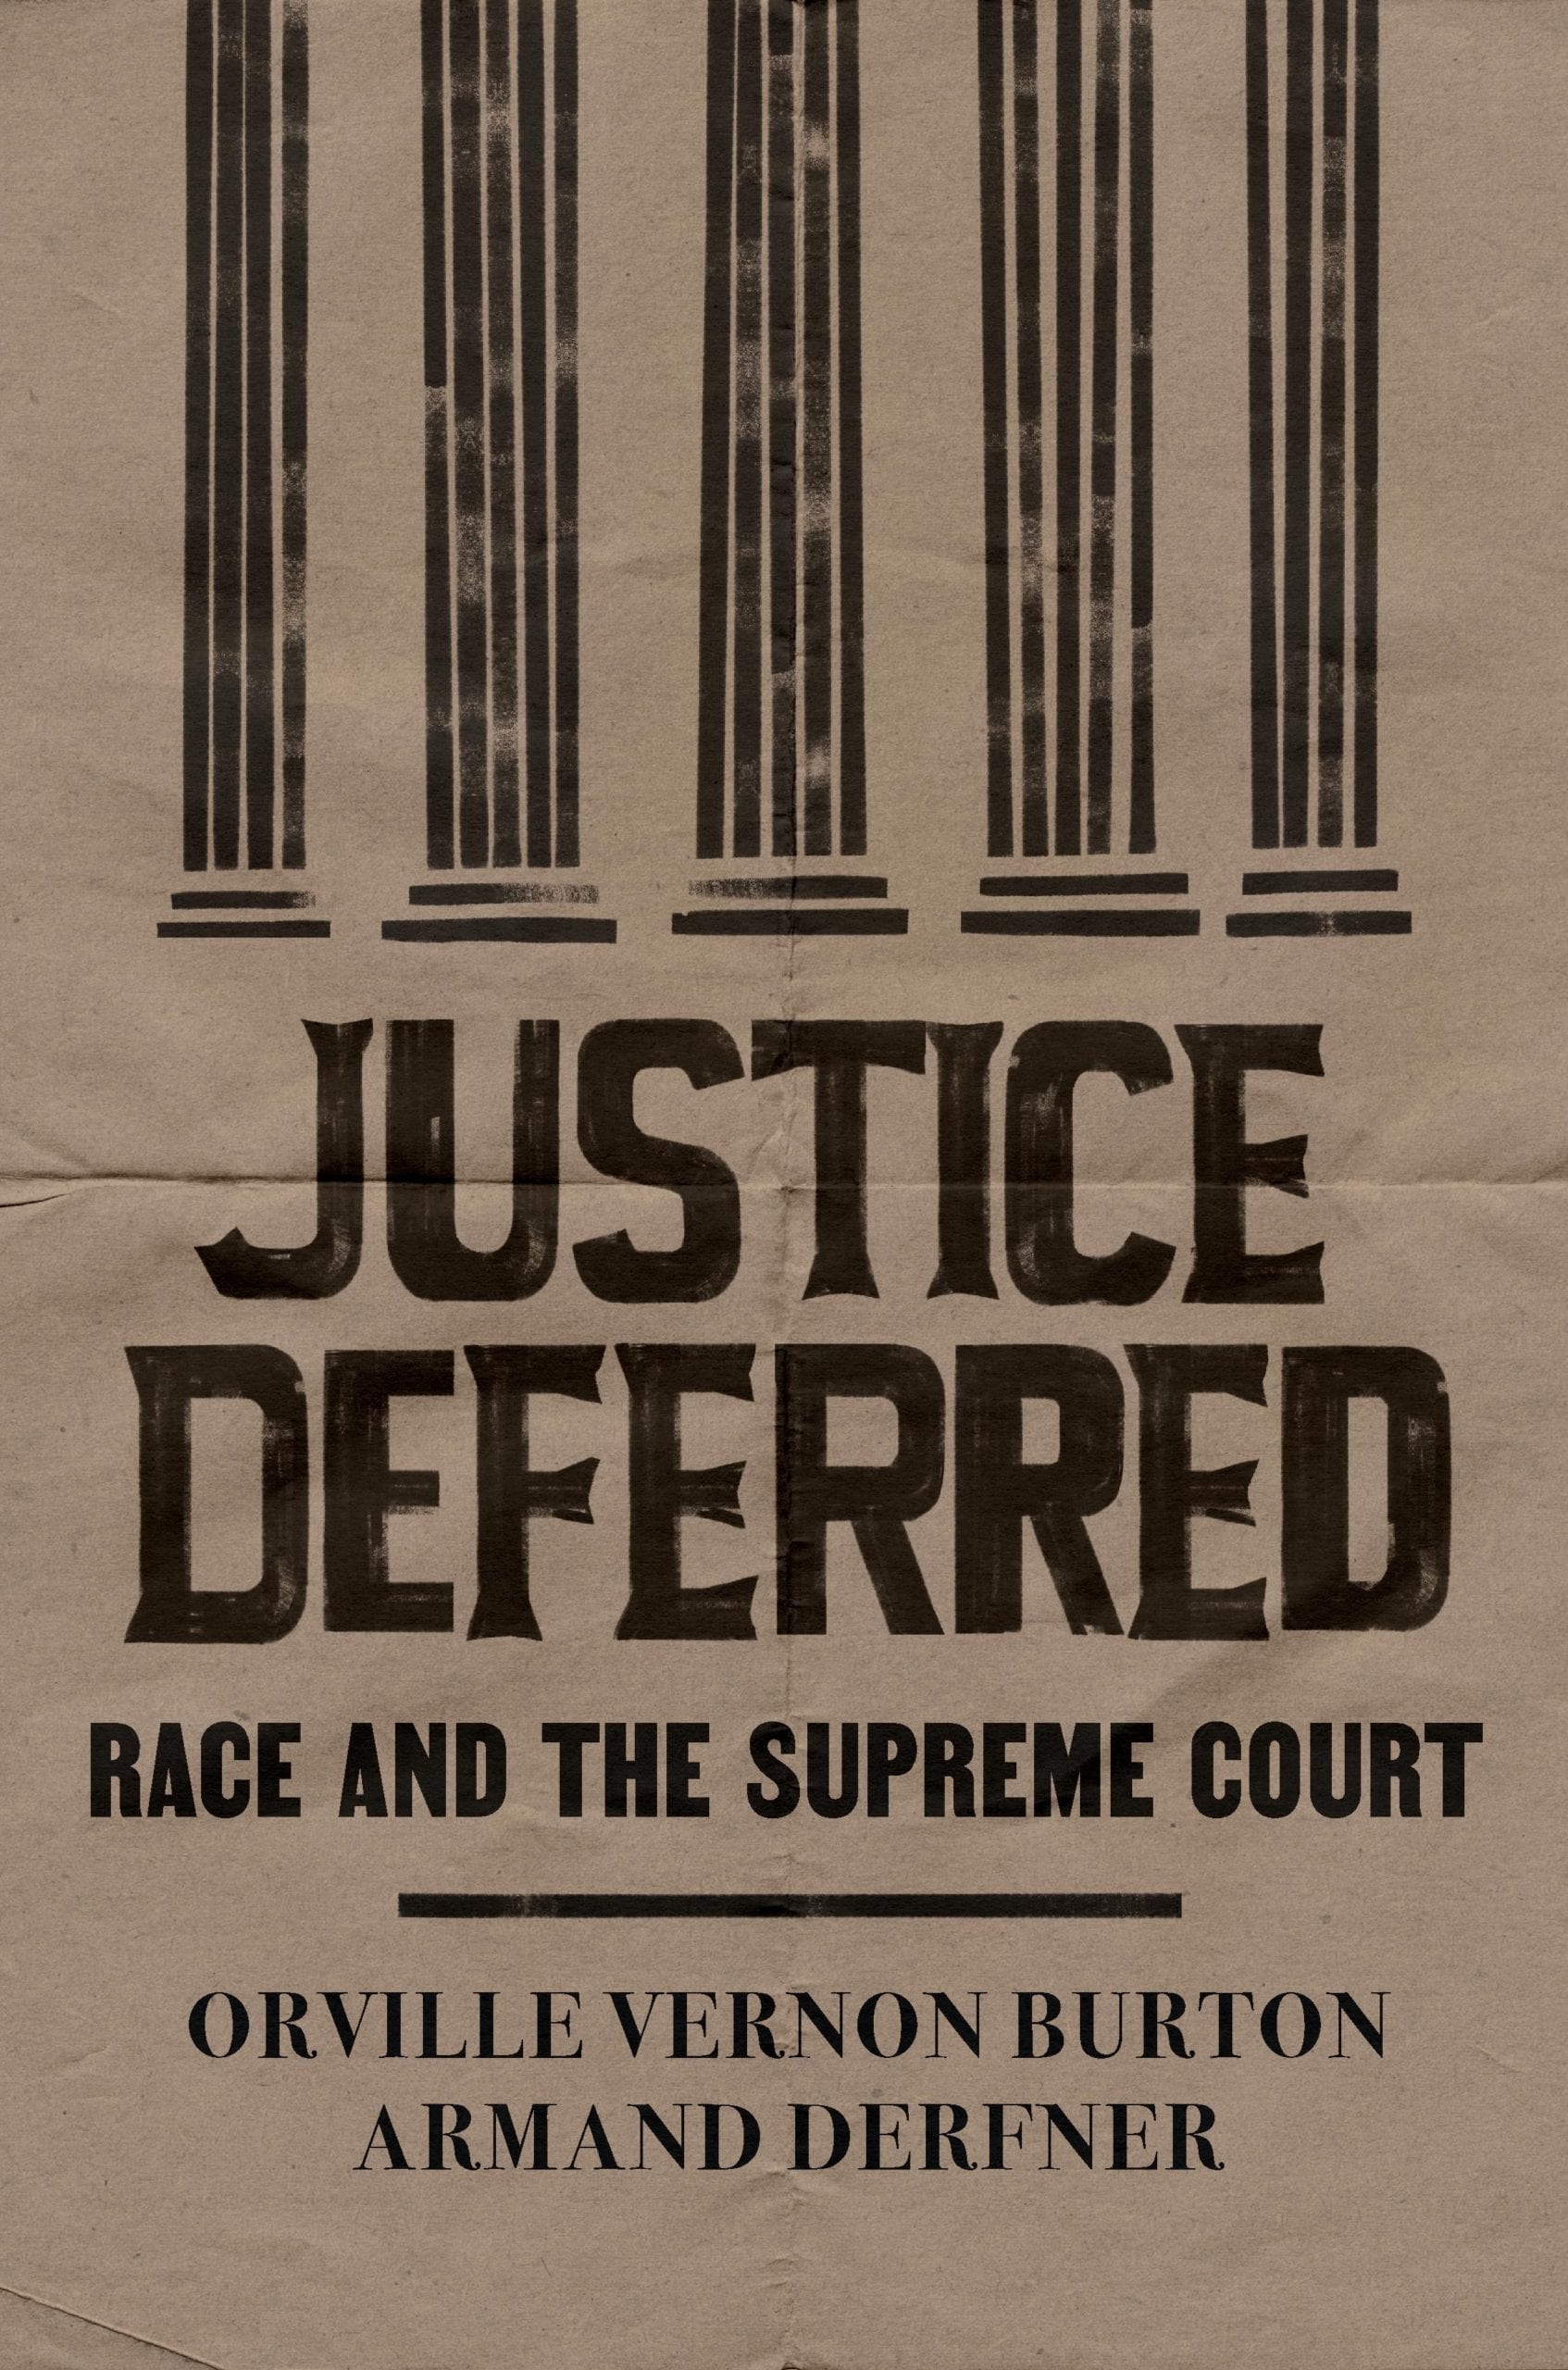 Book cover: Brown paper with JUSTIC DEFERRED: Race and the Supreme Court